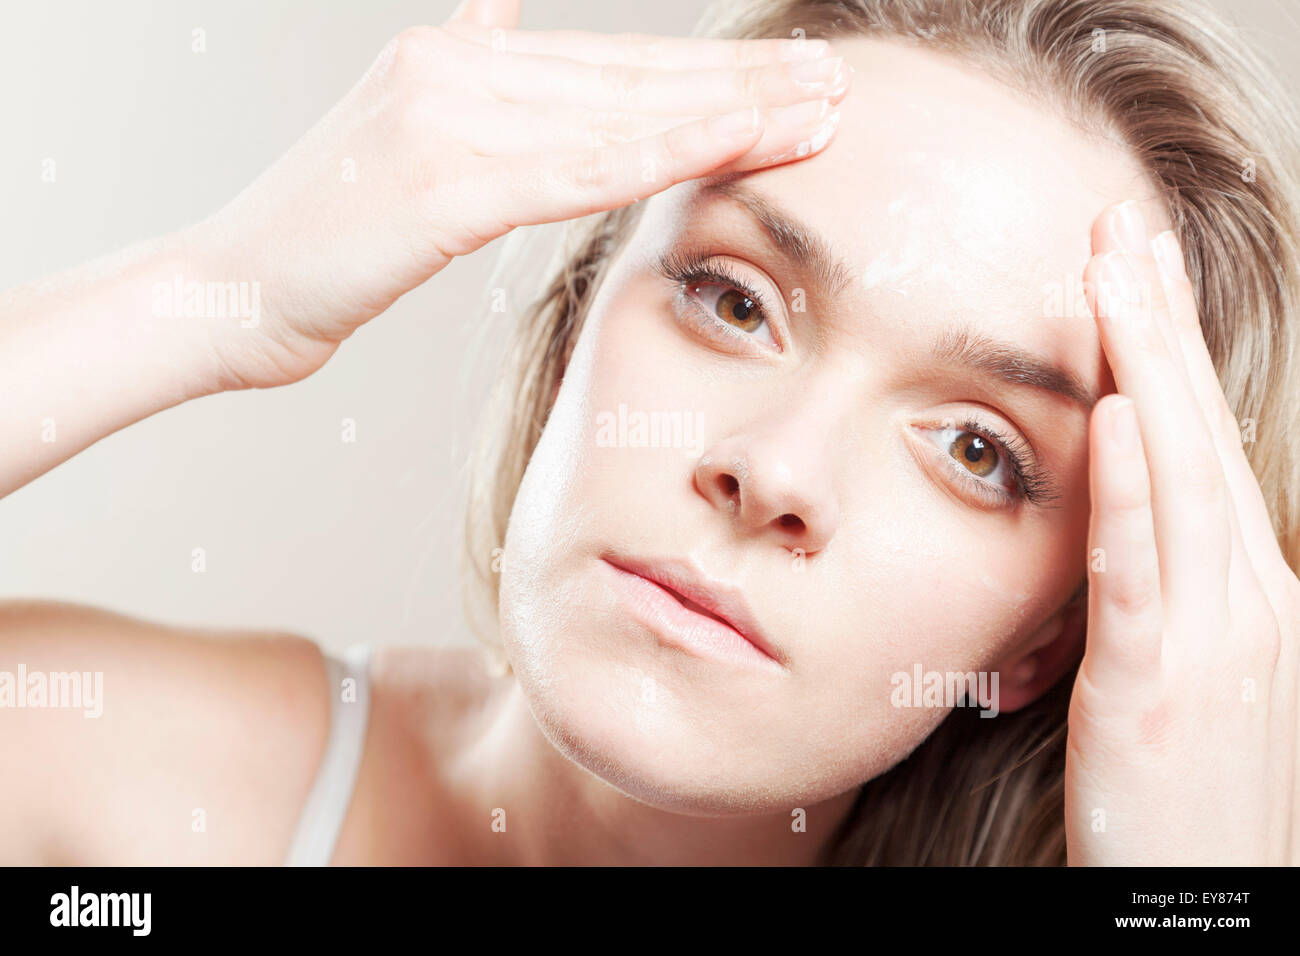 Young woman applying lotion on face, close-up Stock Photo